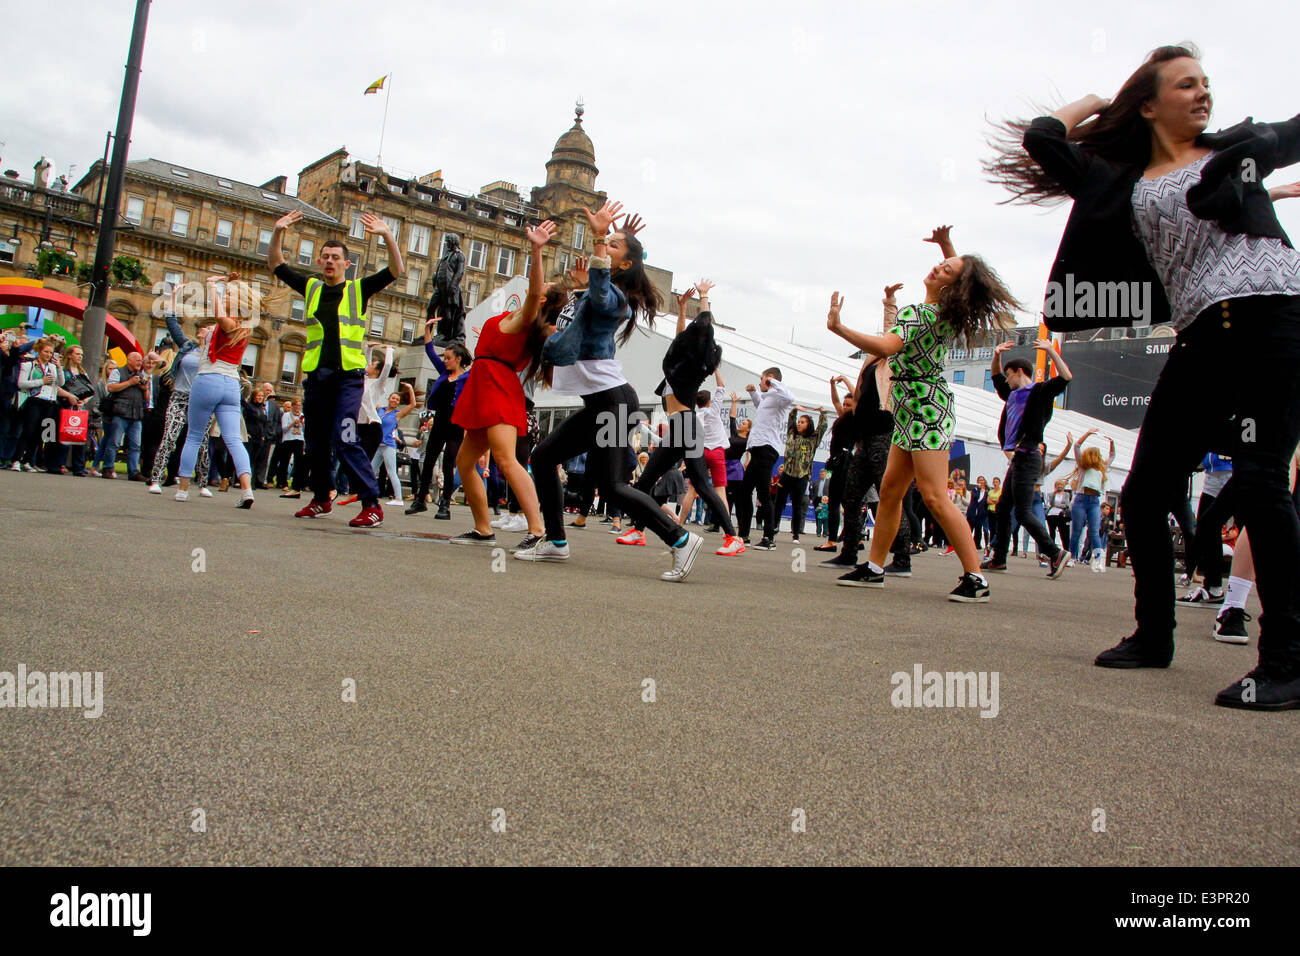 Glasgow, Scotland, UK. 27th June, 2014. A flashmob of 100 dancers heralds the opening of the official games merchandise superstore by Chief Executive David Grevemberg Credit:  ALAN OLIVER/Alamy Live News Stock Photo